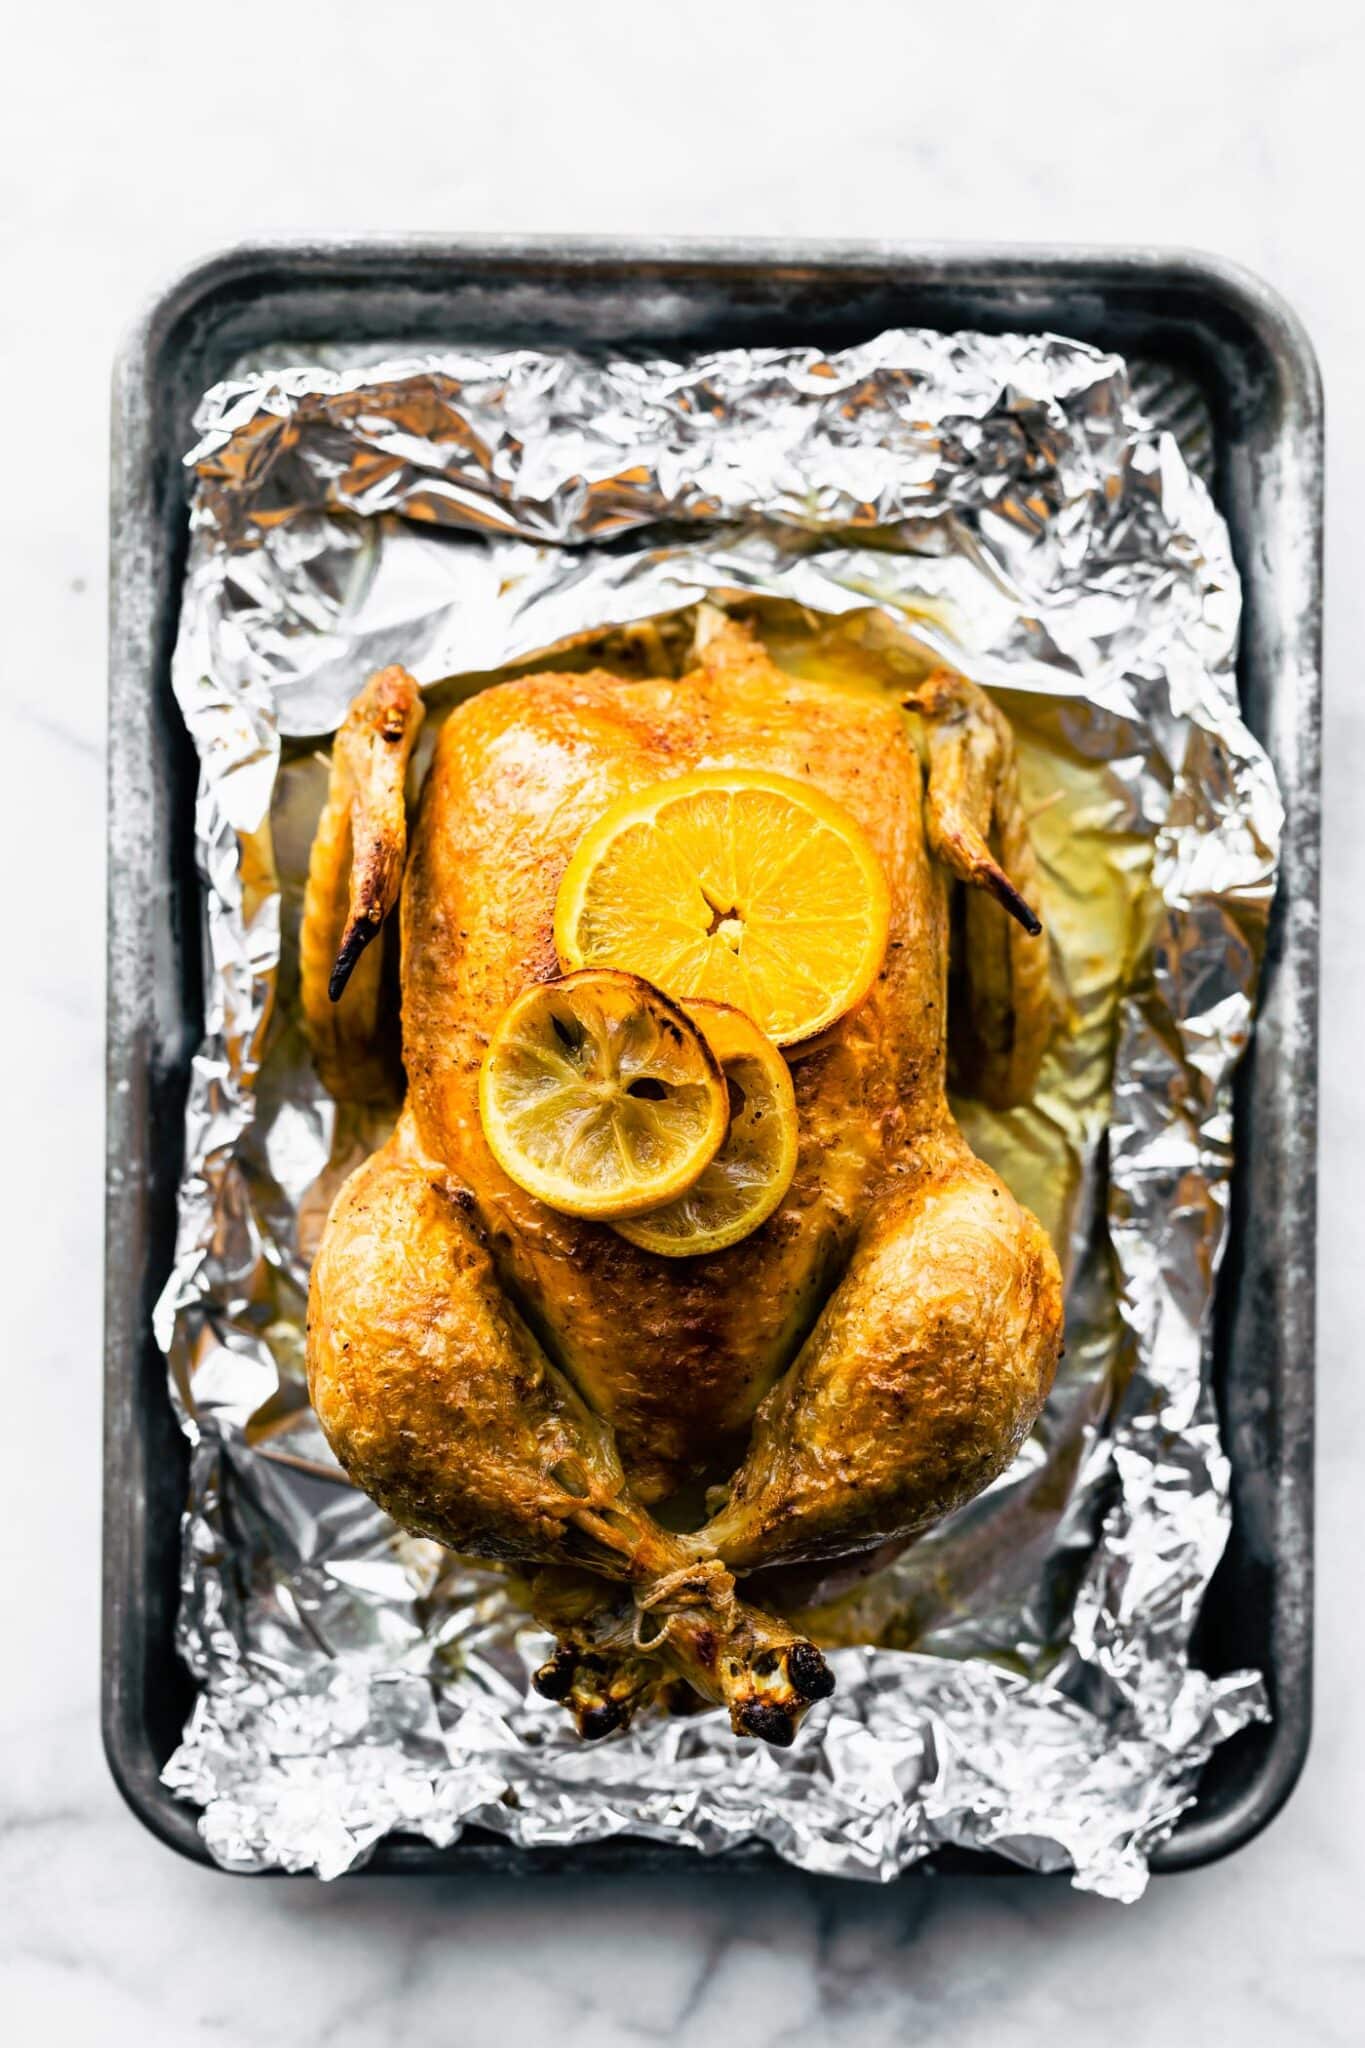 Overhead photo of a baked whole chicken with lemon slices on top.